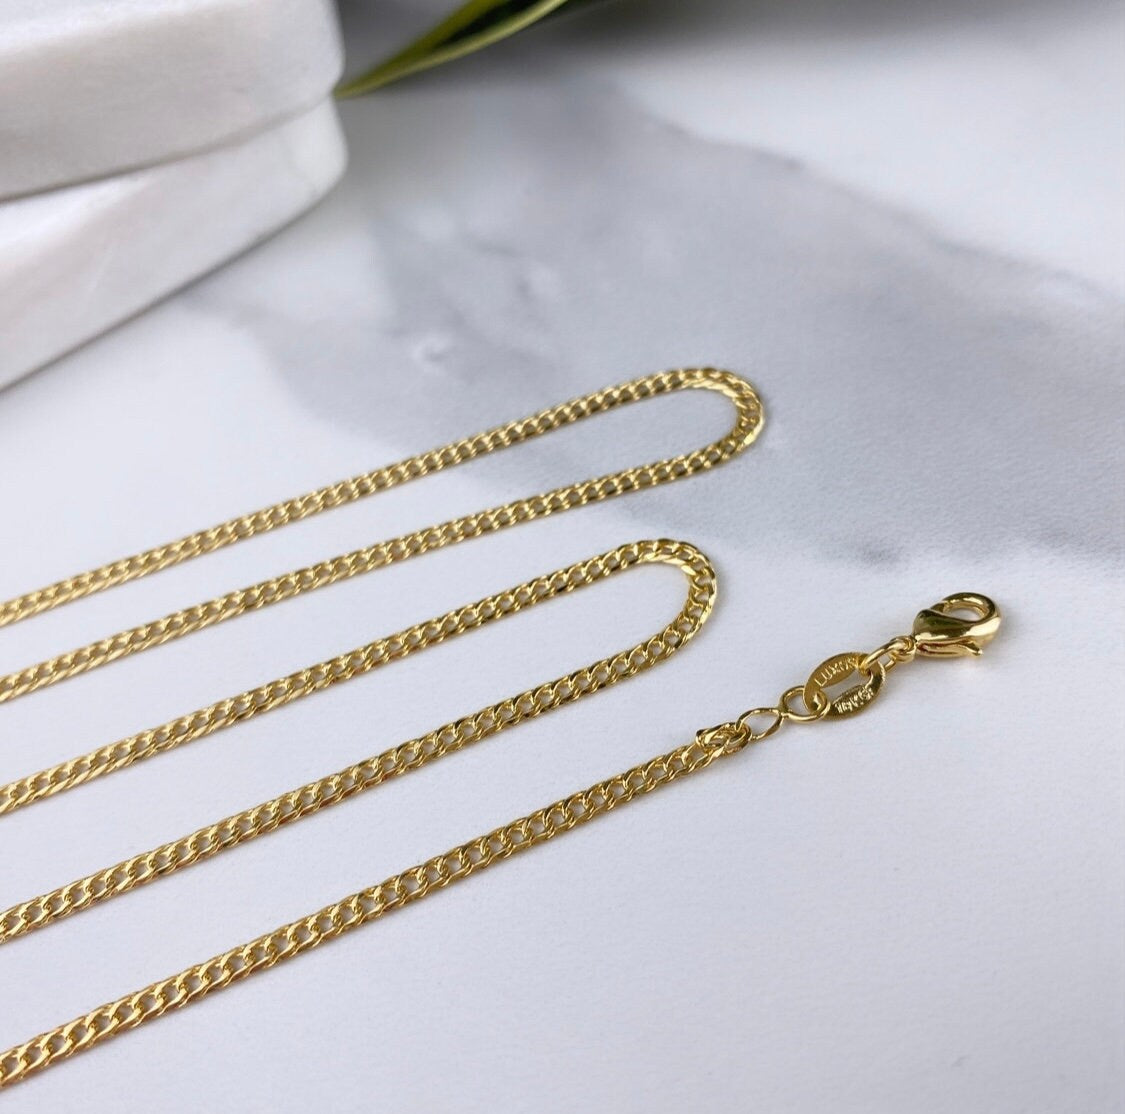 18k Gold Filled 2.2mm Thickness Double Cuban Link Chain, Curb Link Necklace, 20", 22"and 24" Wholesale Jewelry Making Supplies